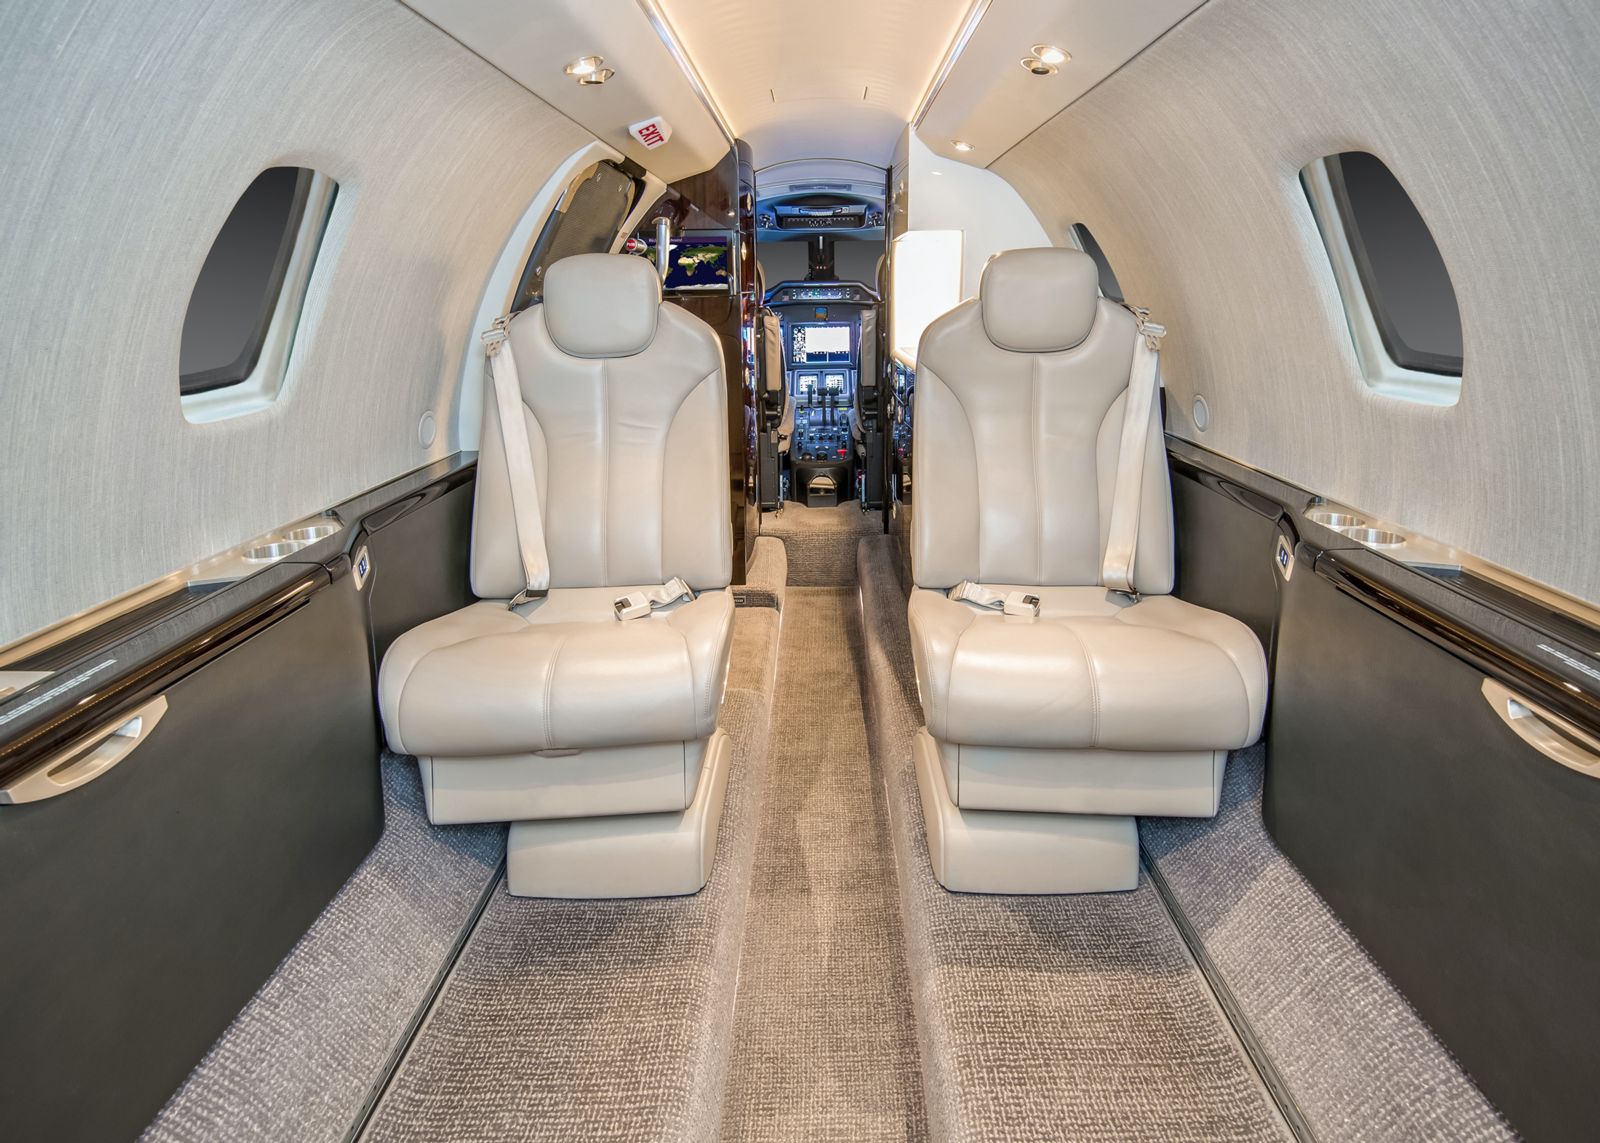 Cessna/Textron Citation X+  S/N 524 for sale | gallery image: /userfiles/images/Citation_X_Plus_sn524/fwd%20fwd.jpg